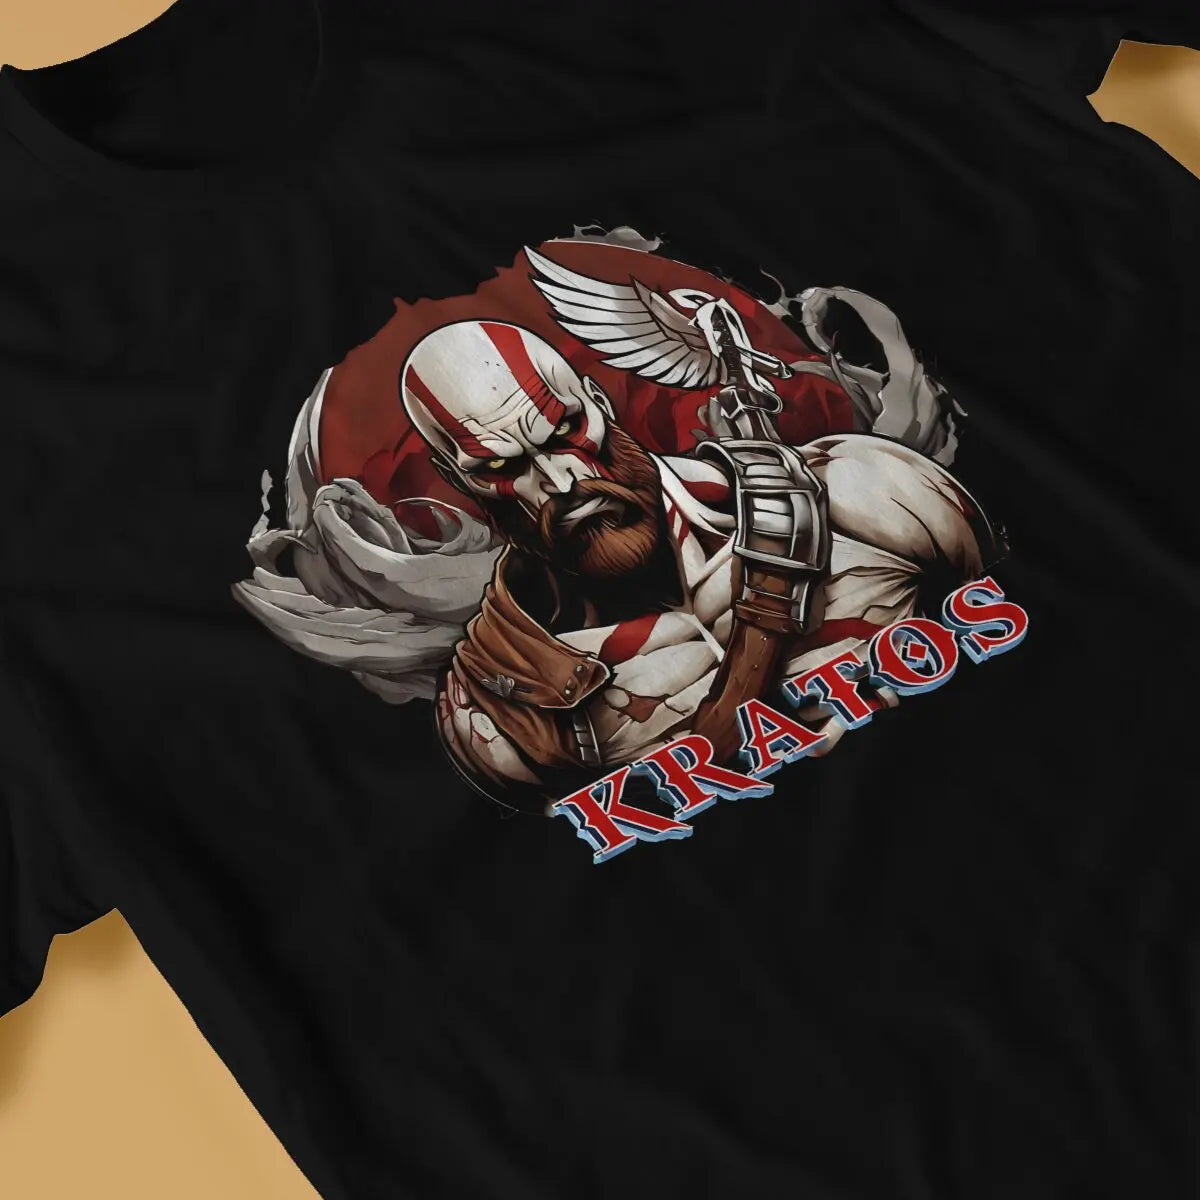 God Of War Kratos TShirt Classic Design - Available at 2Fast2See.co